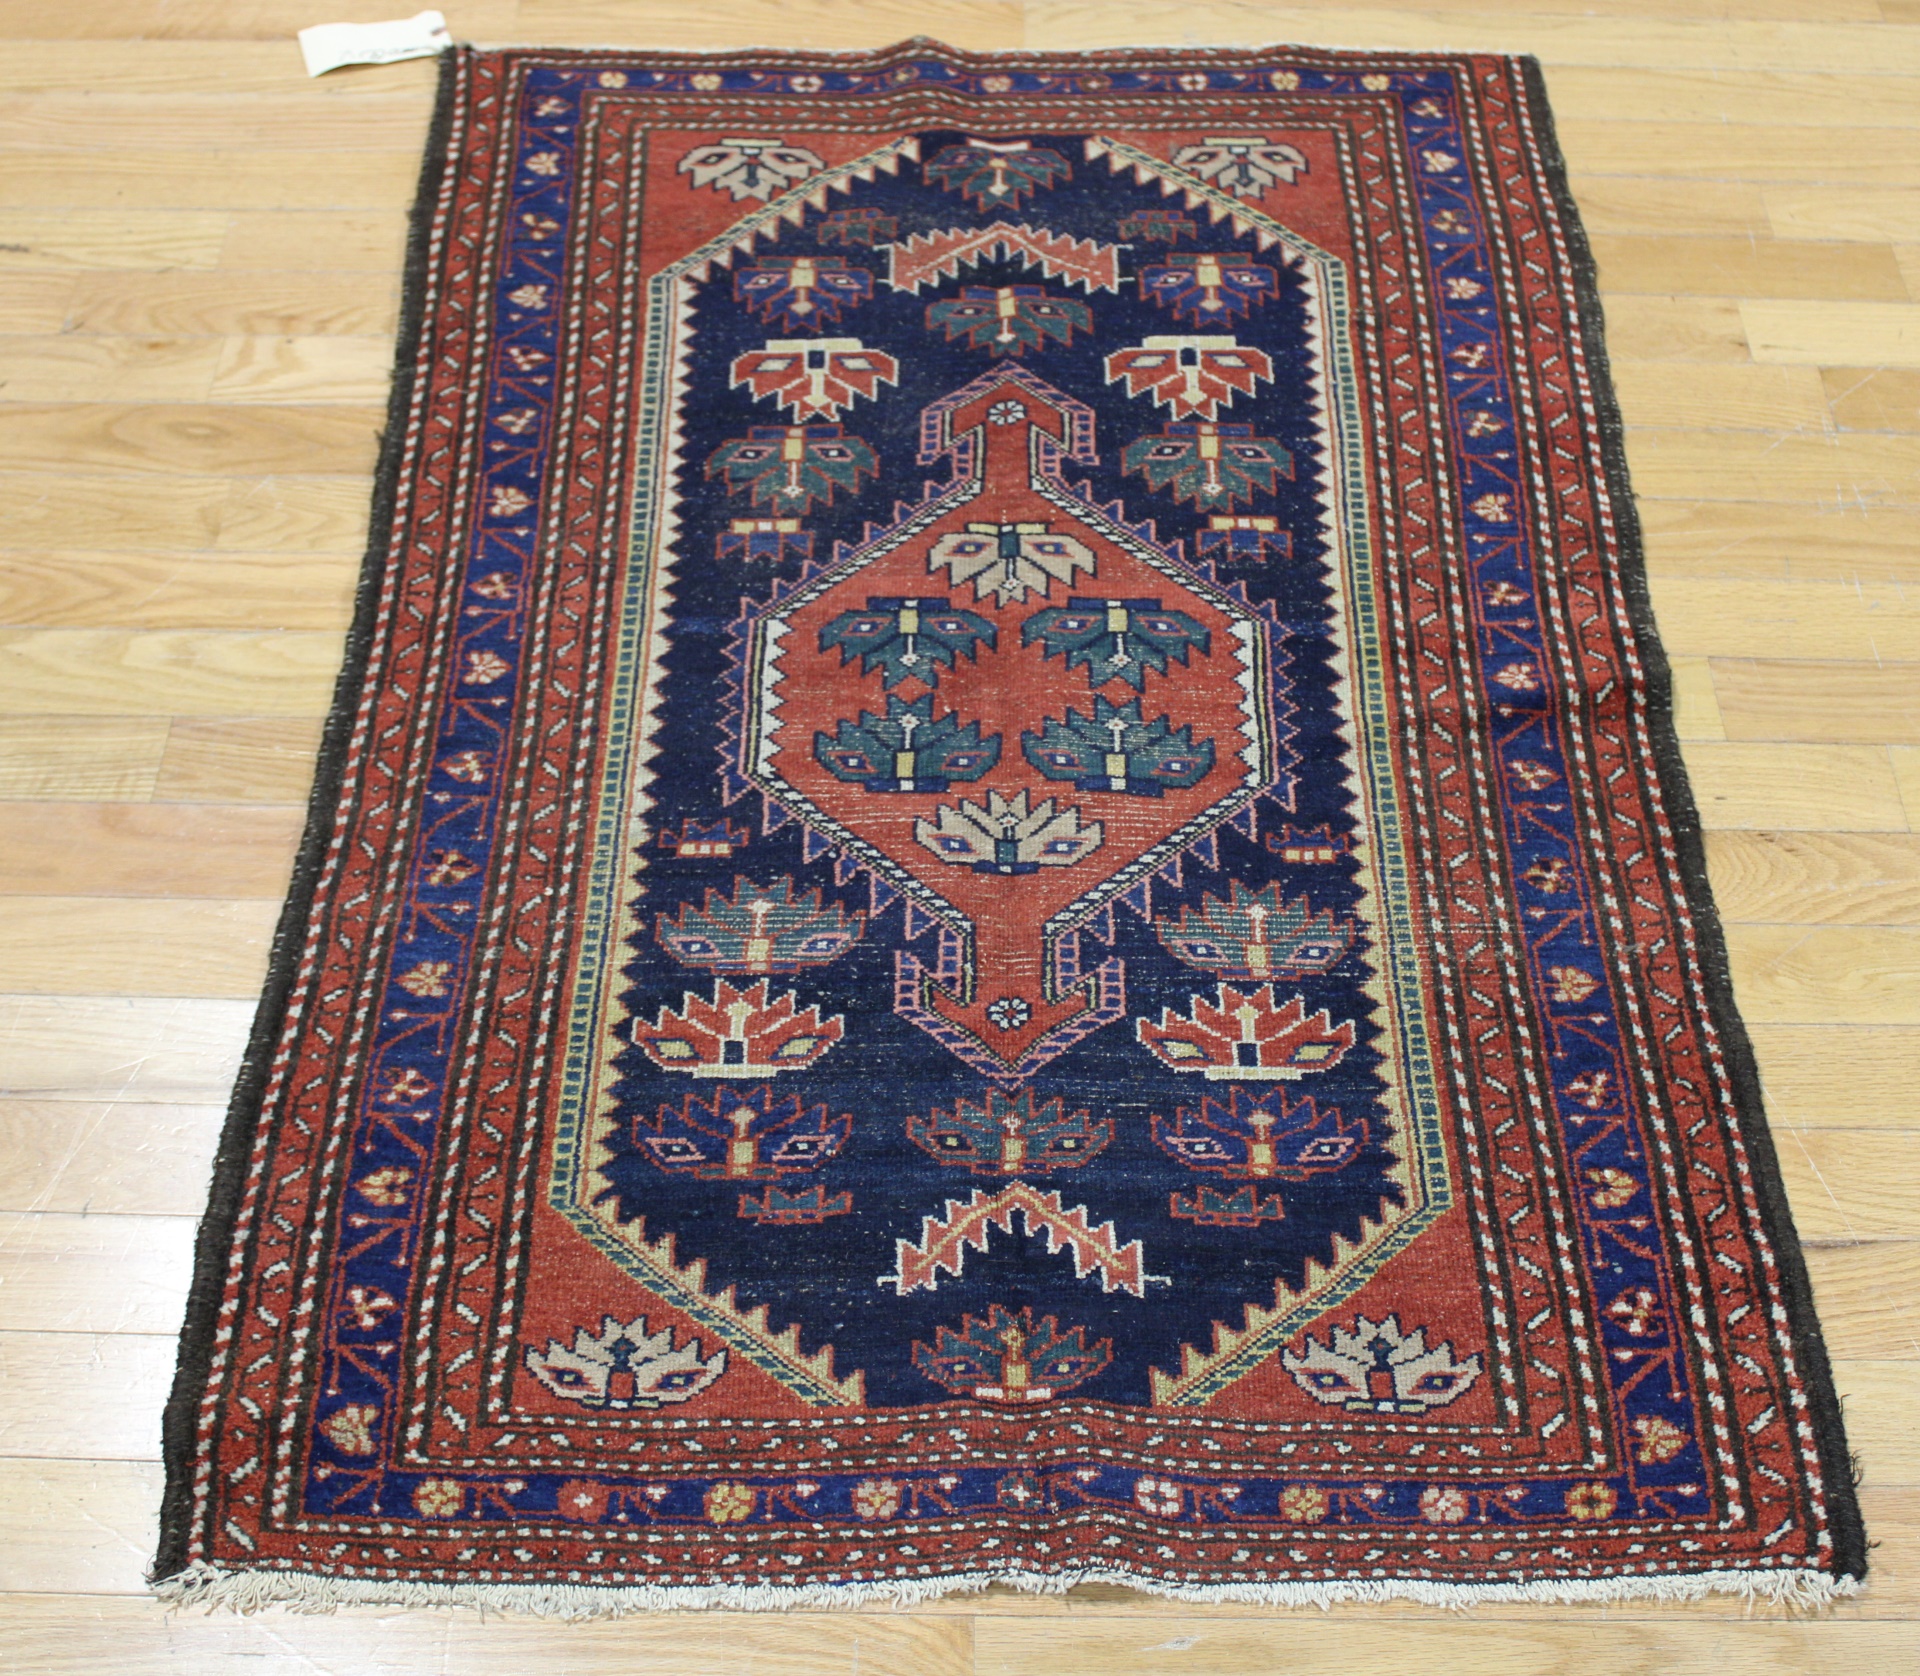 ANTIQUE AND FINELY HAND WOVEN CARPET.